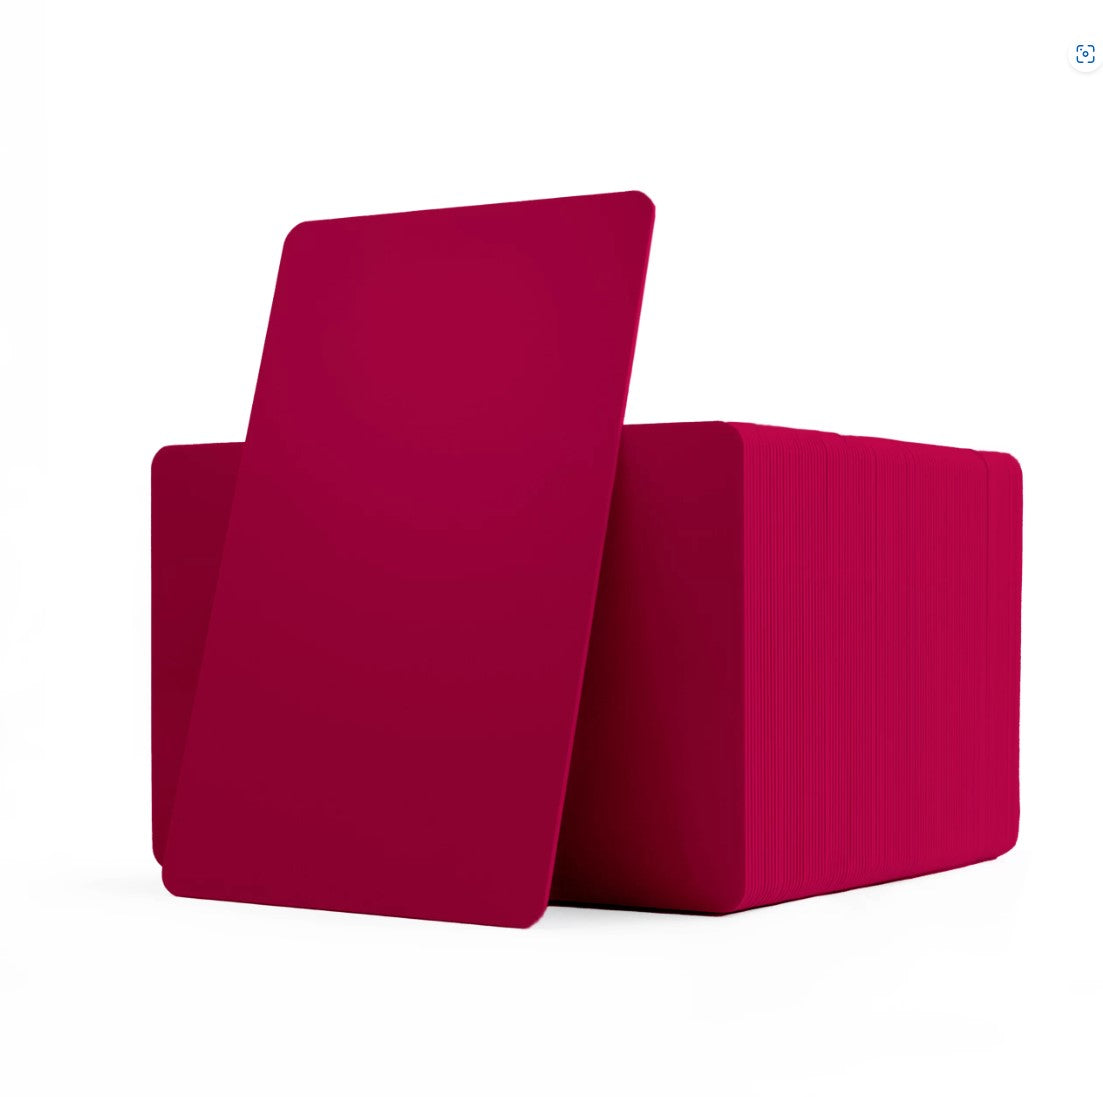 PVC CR80 Burgundy Coloured Cards With Solid Core Coloured Edges - 1 - 100